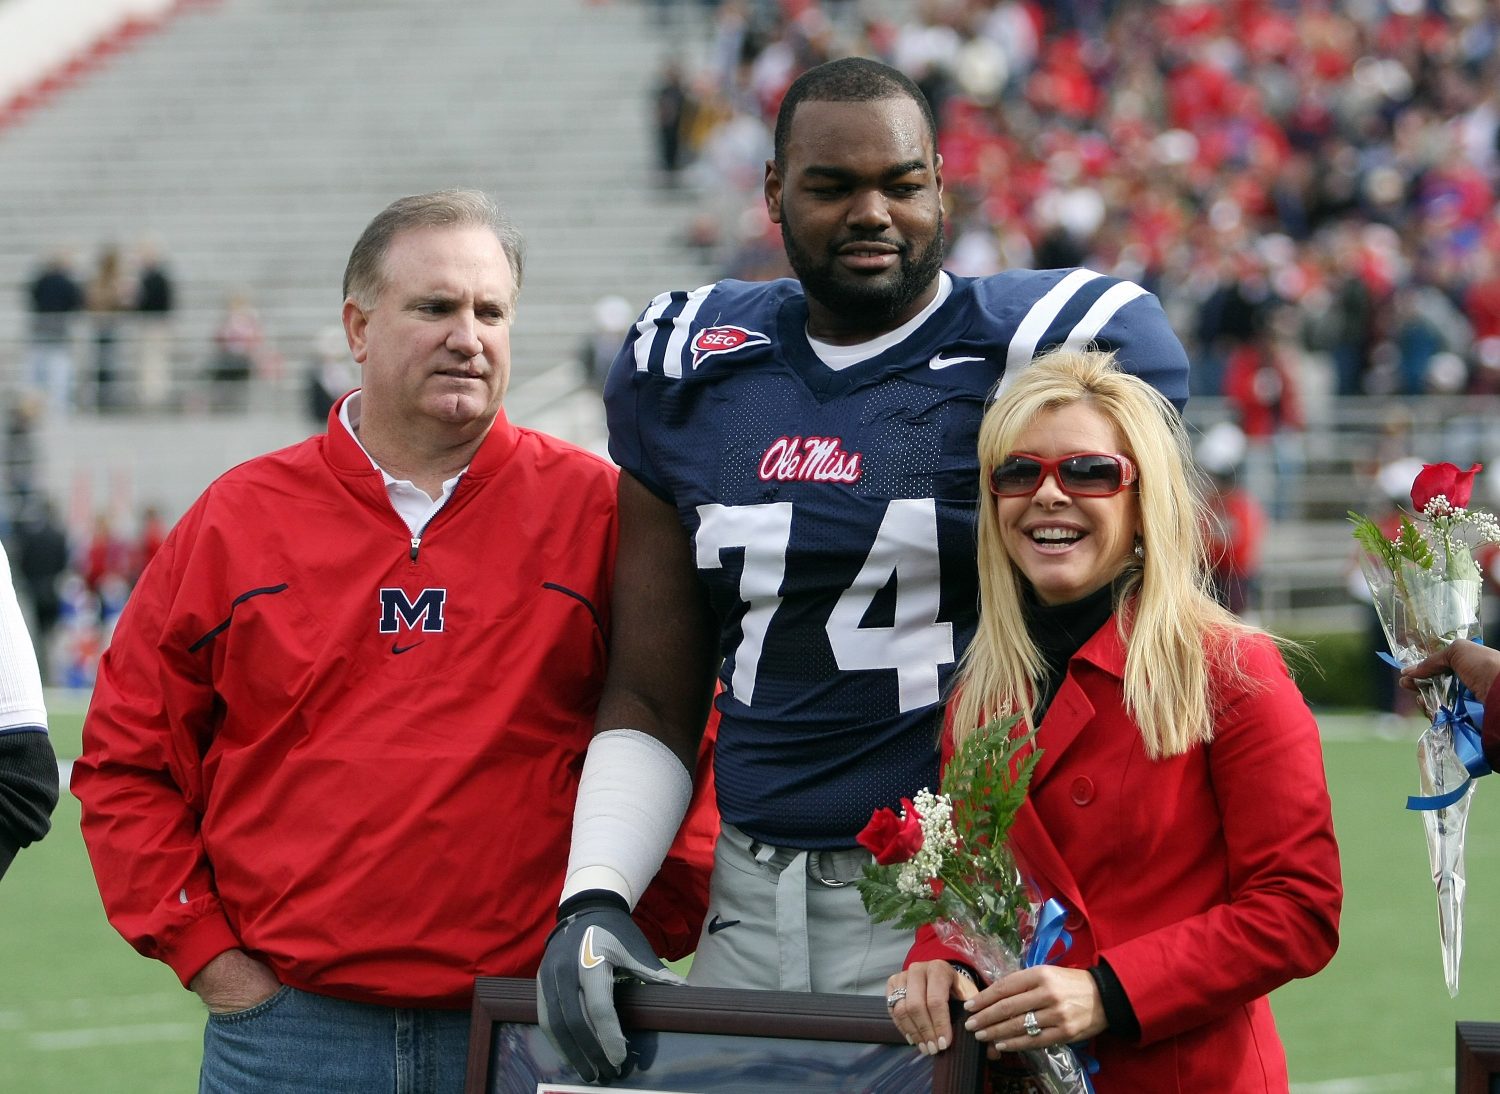 Michael Oher #74 of the Ole Miss Rebels stands with his family during senior ceremonies prior to a game against the Mississippi State Bulldogs.